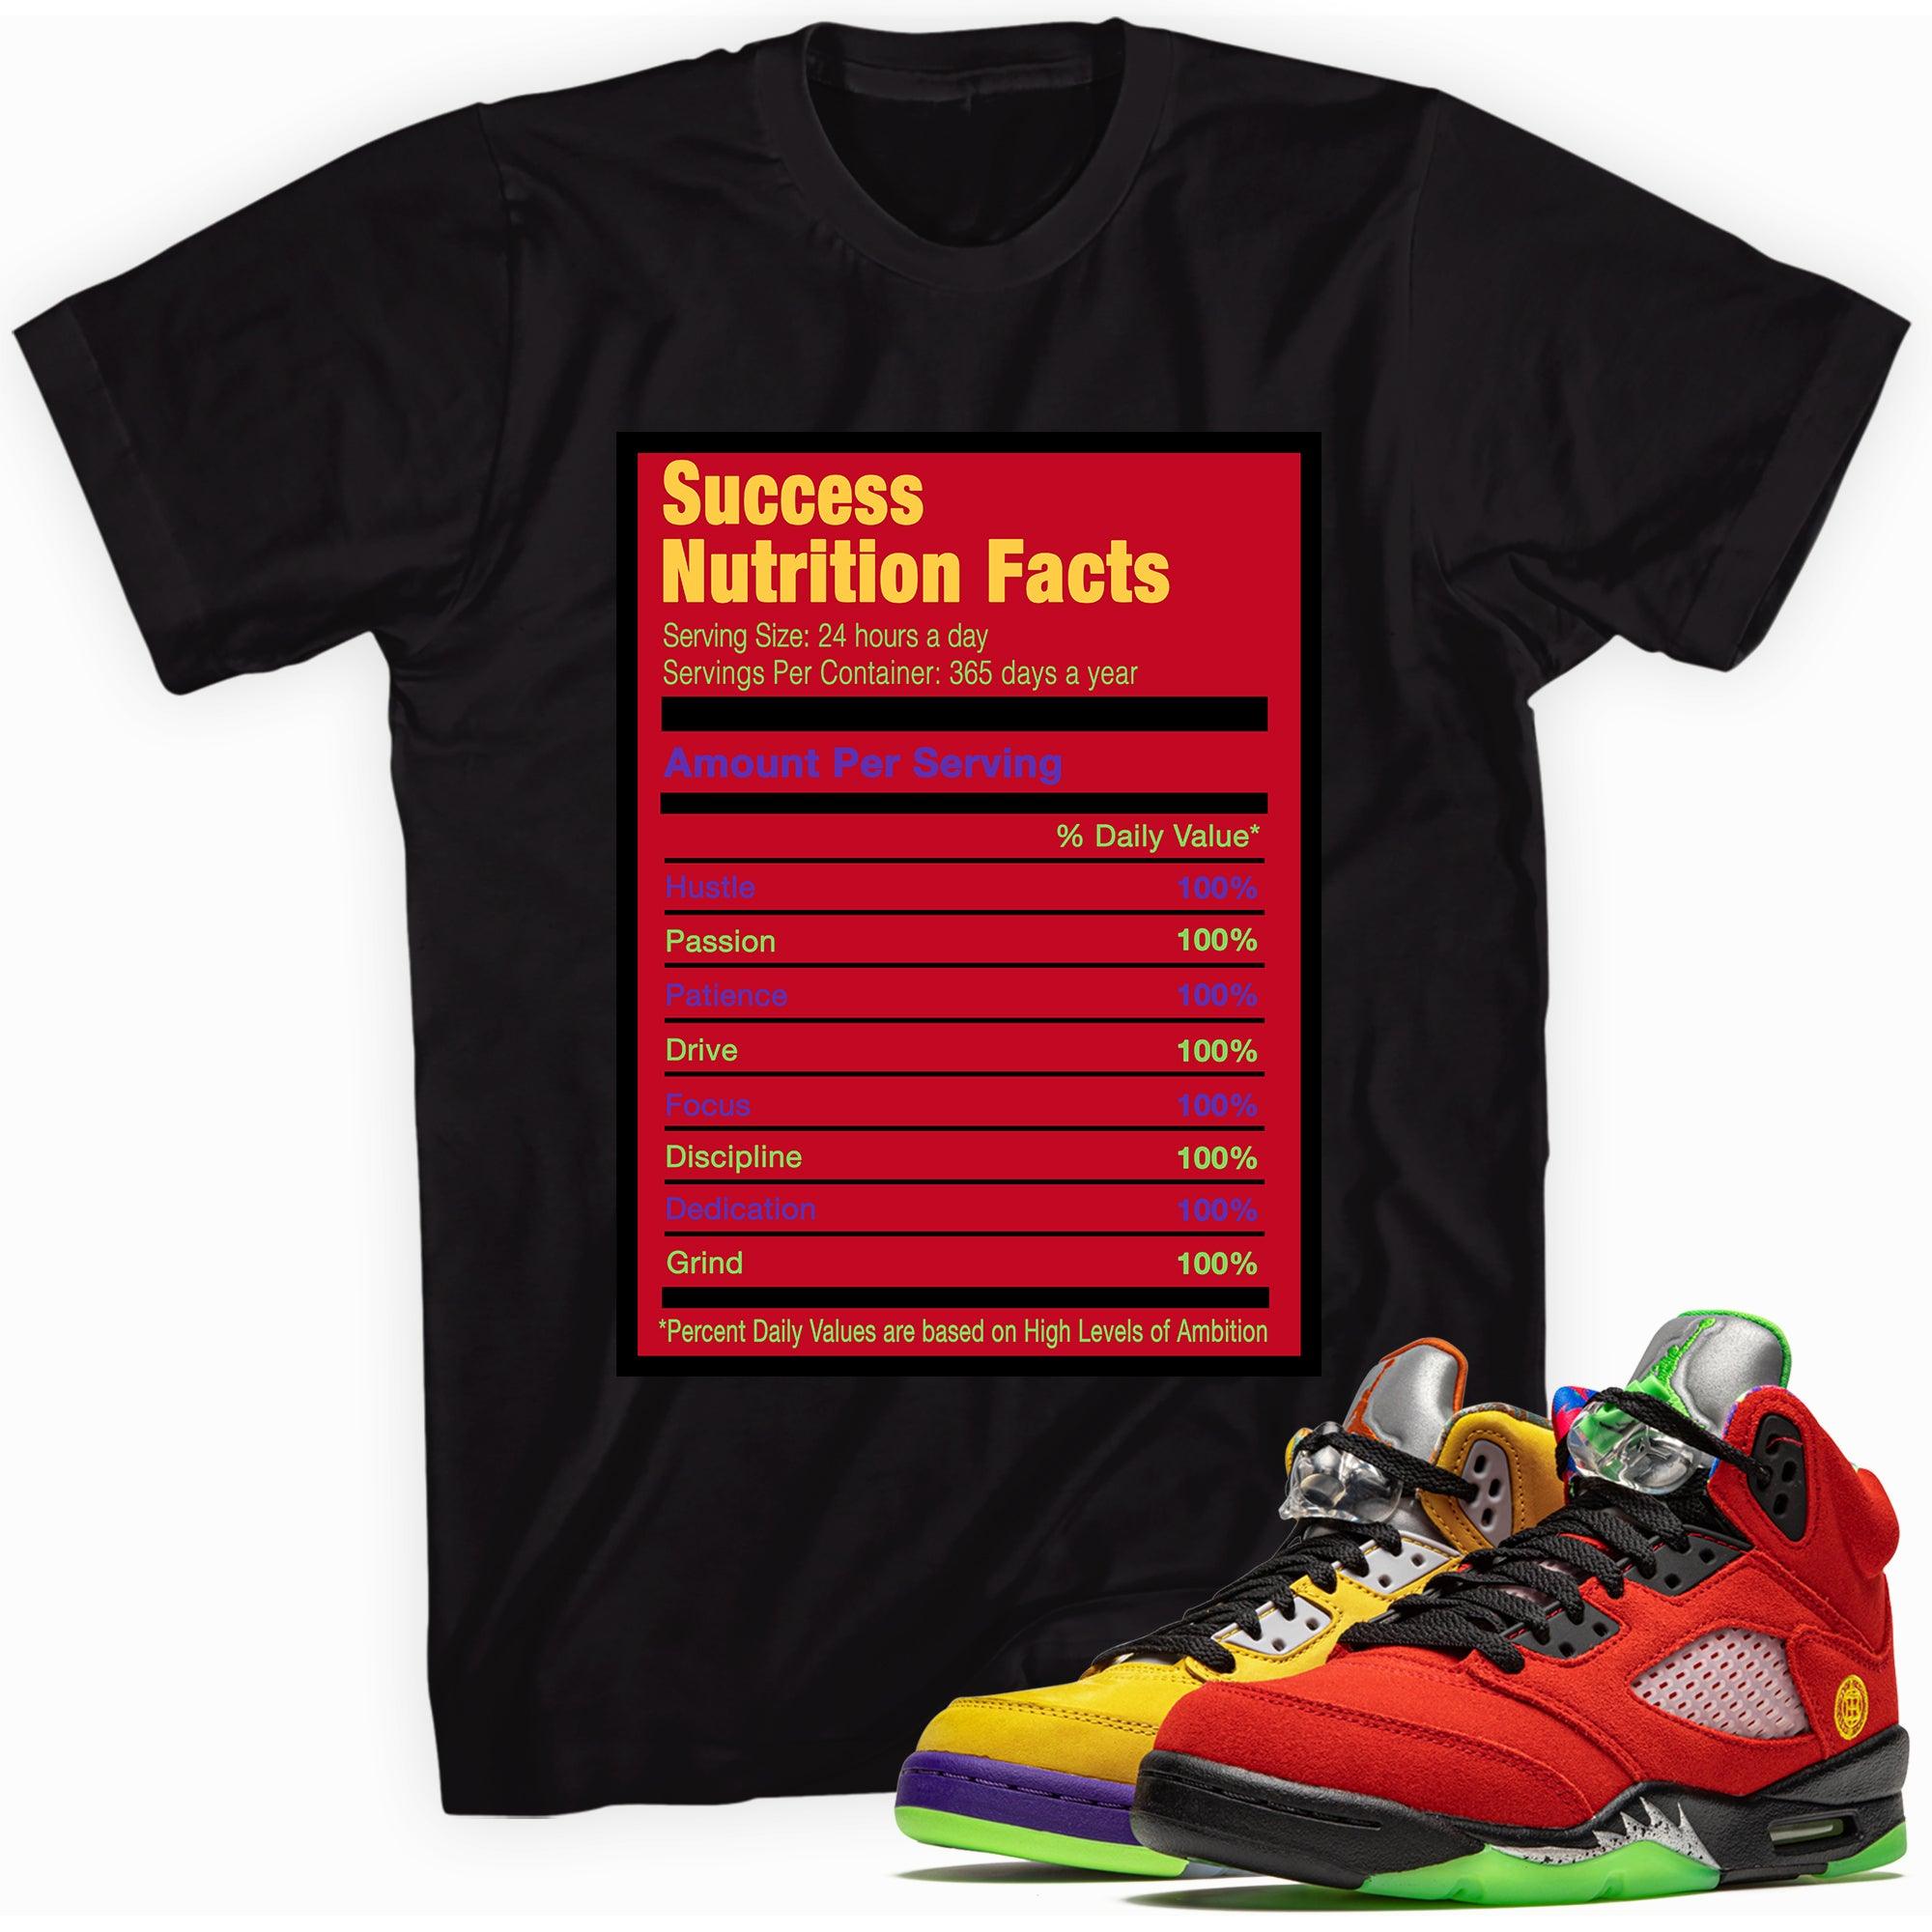 Success Nutrition Facts Shirt AJ 5 What The photo